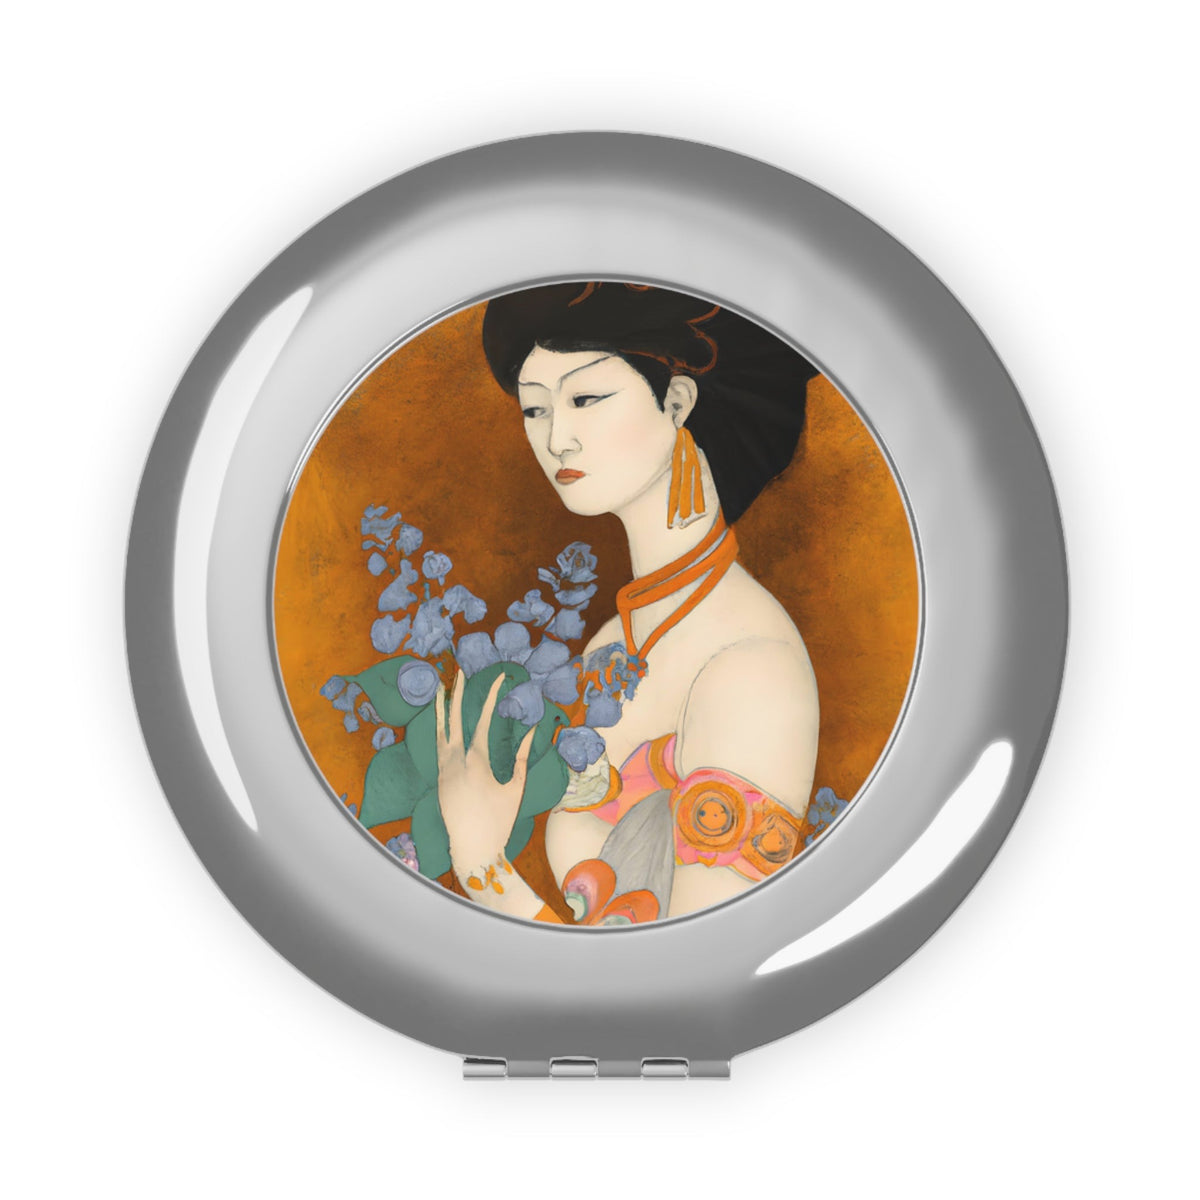 front view of a compact mirror with a painted image of a Geisha holding some violets